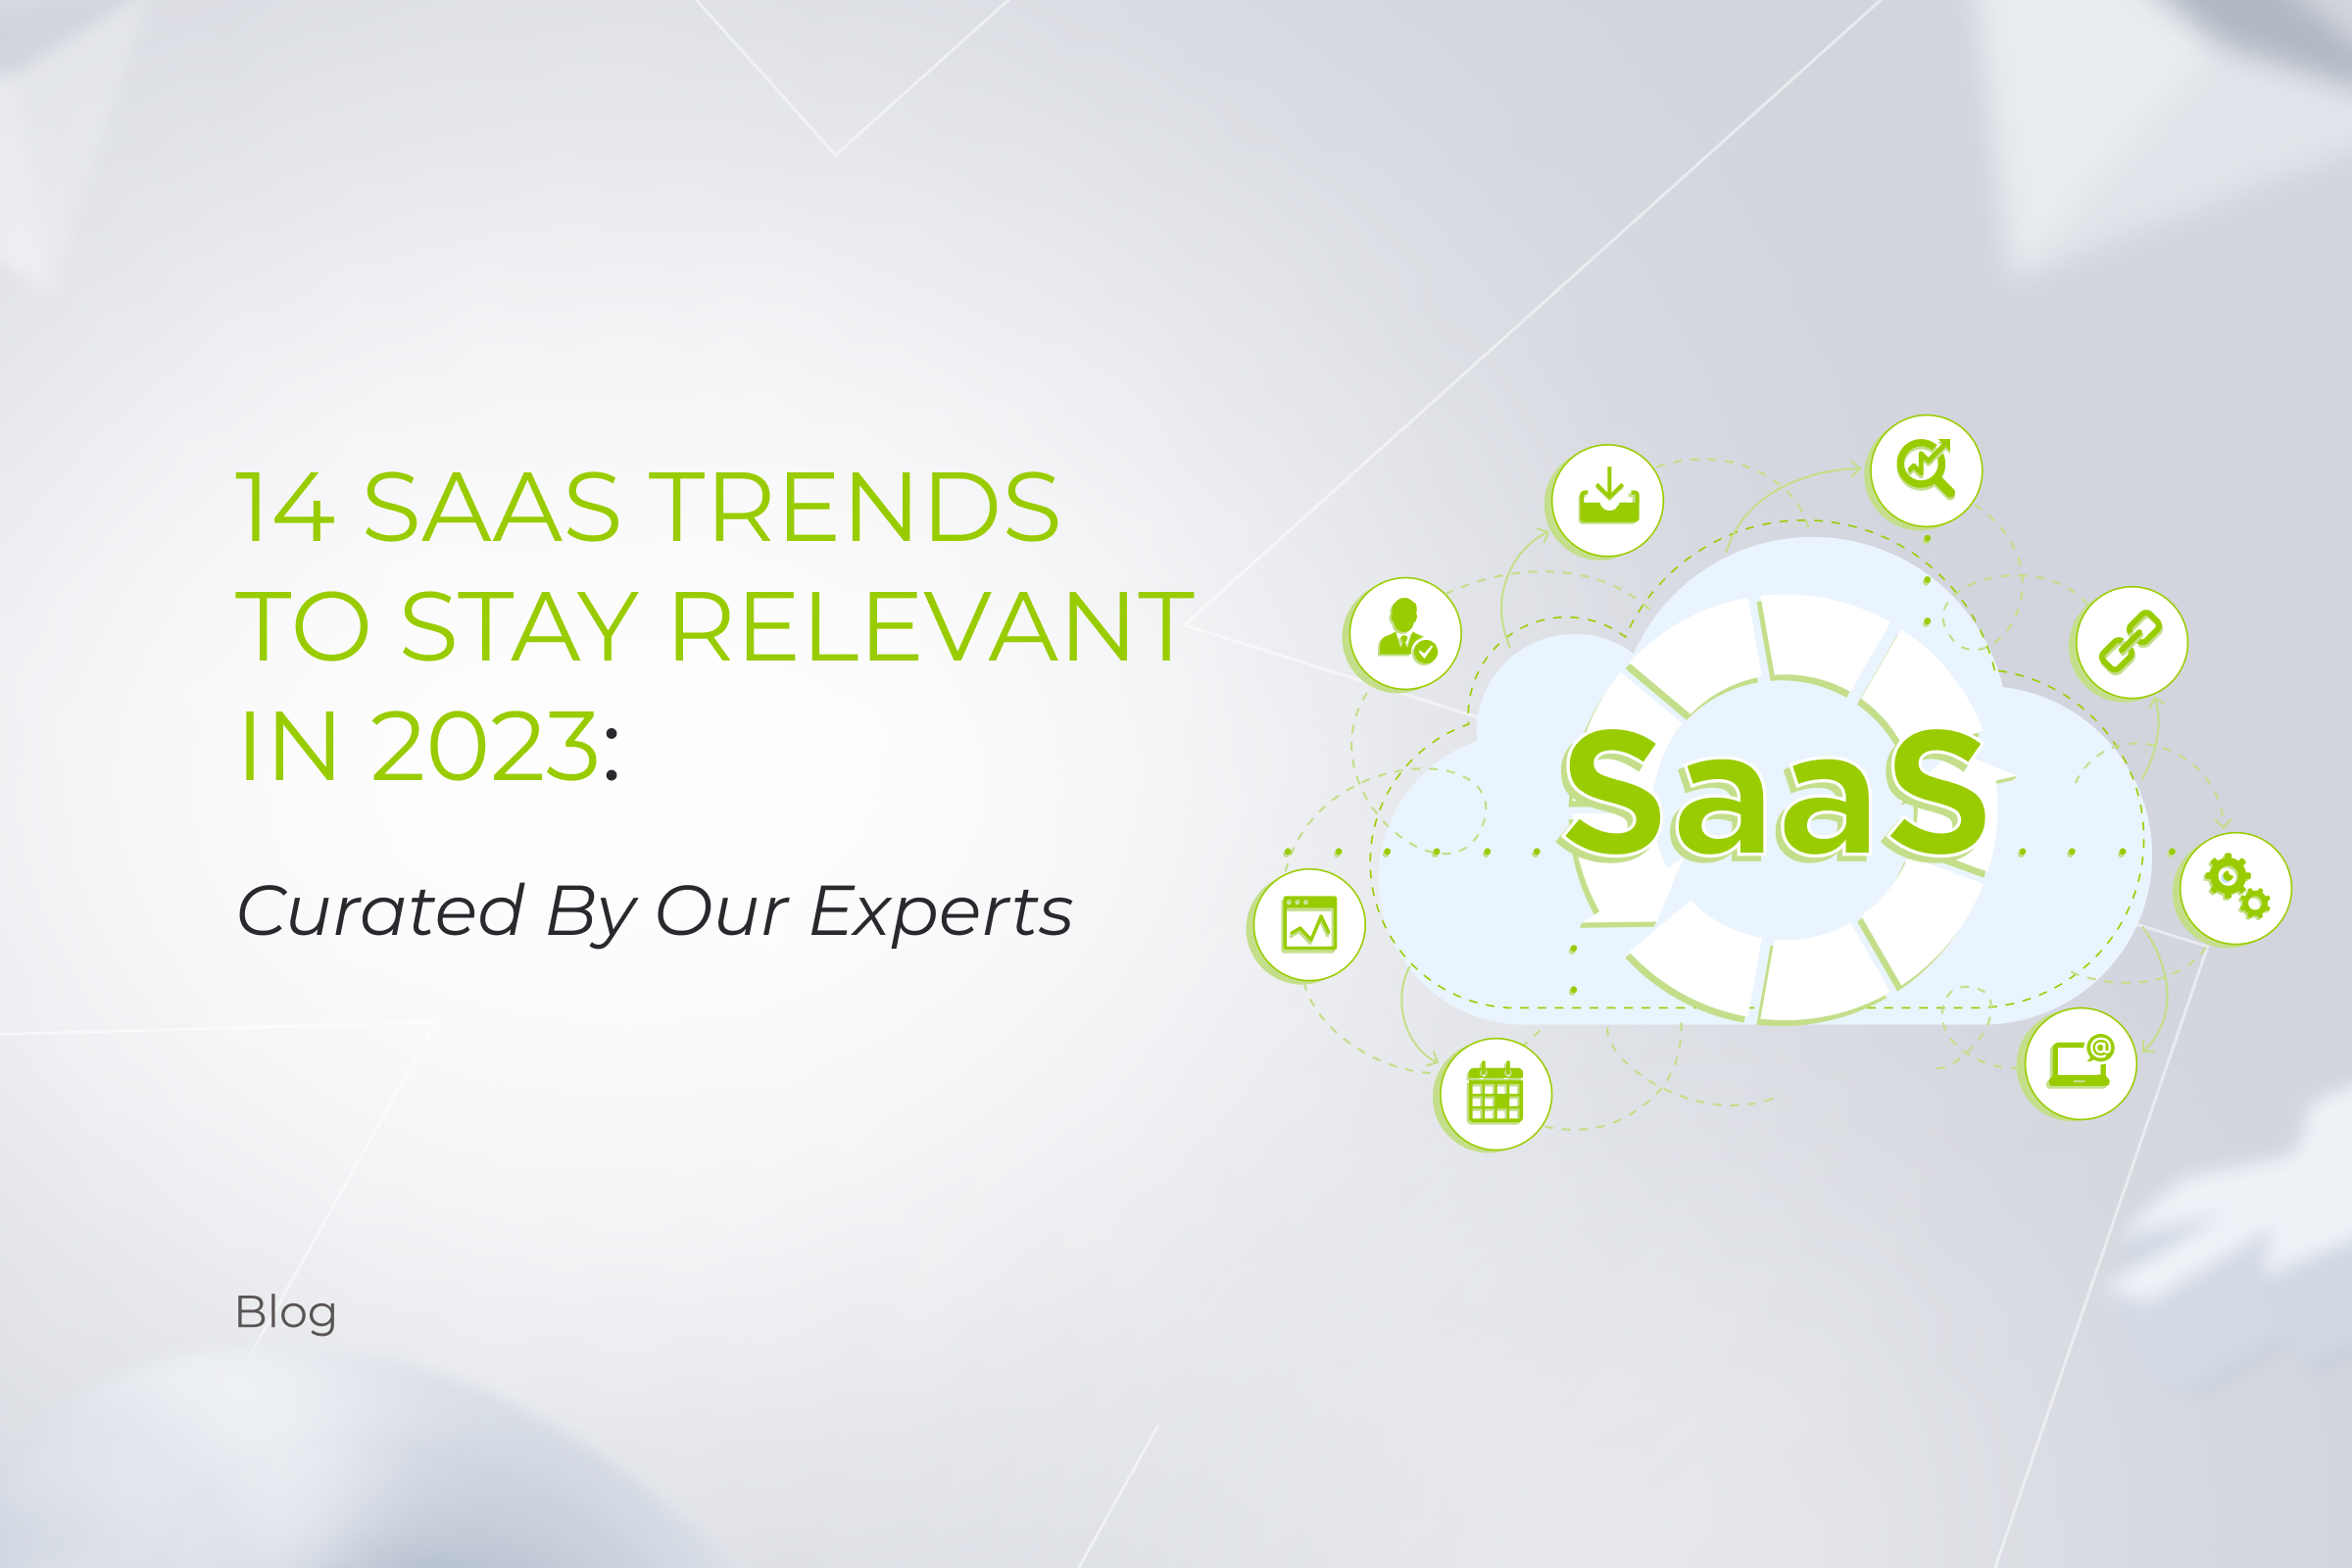 14 SaaS Trends to Stay Relevant in 2023: Curated By Our Experts